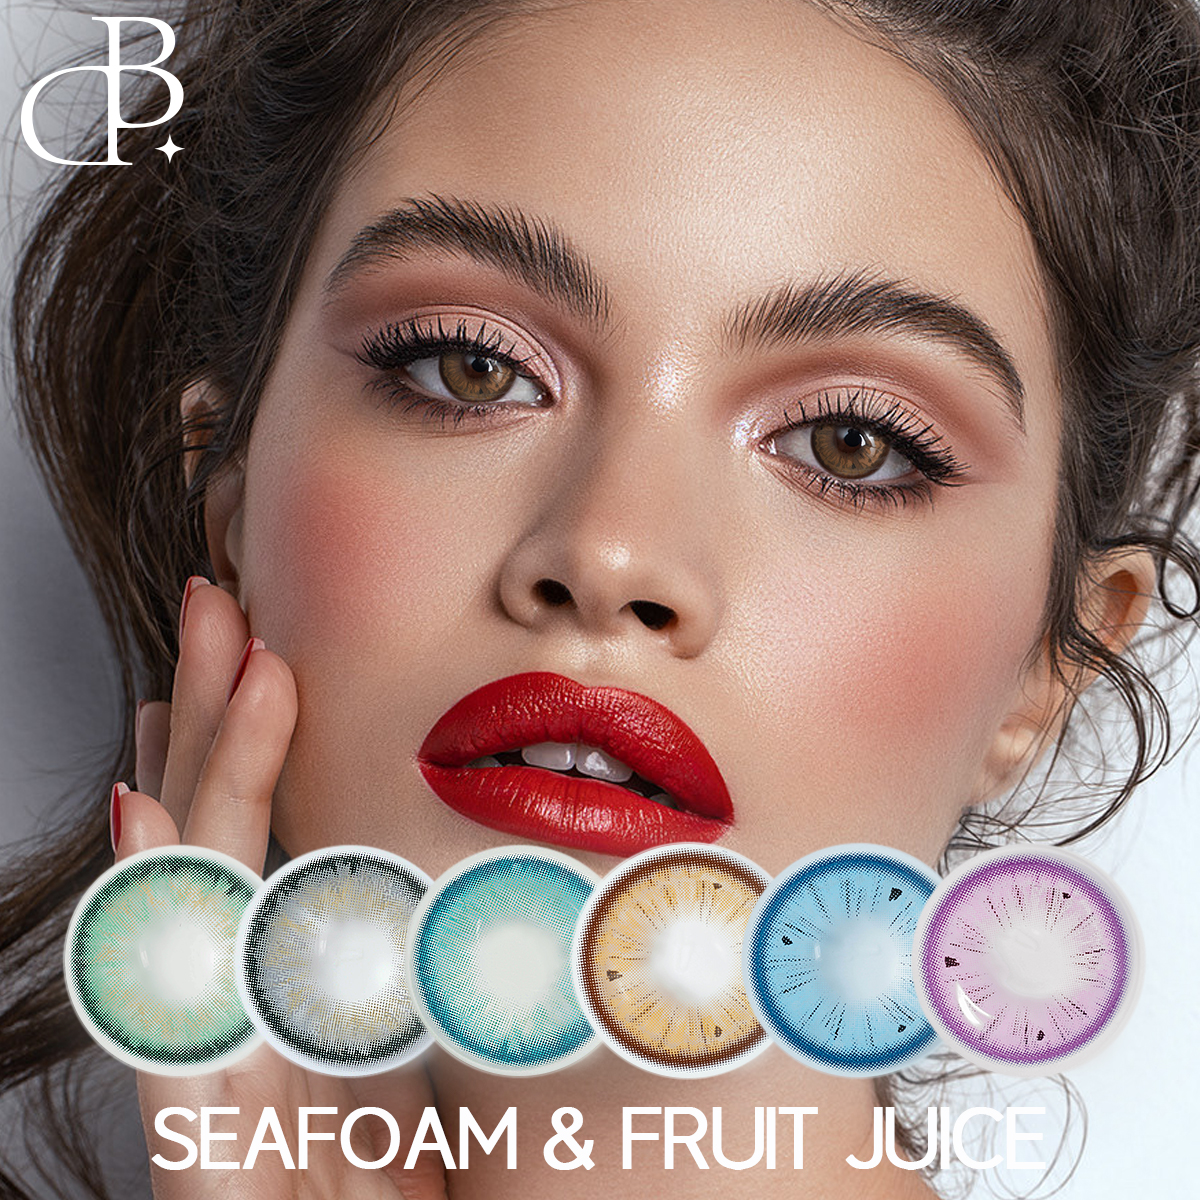 https://www.dblenses.com/seafoamfruit-juice-oemodm-contacto-new-style-natural-eyes-colored-lens-cosmetic-eyes-lens-color-contacts-lenses-product/